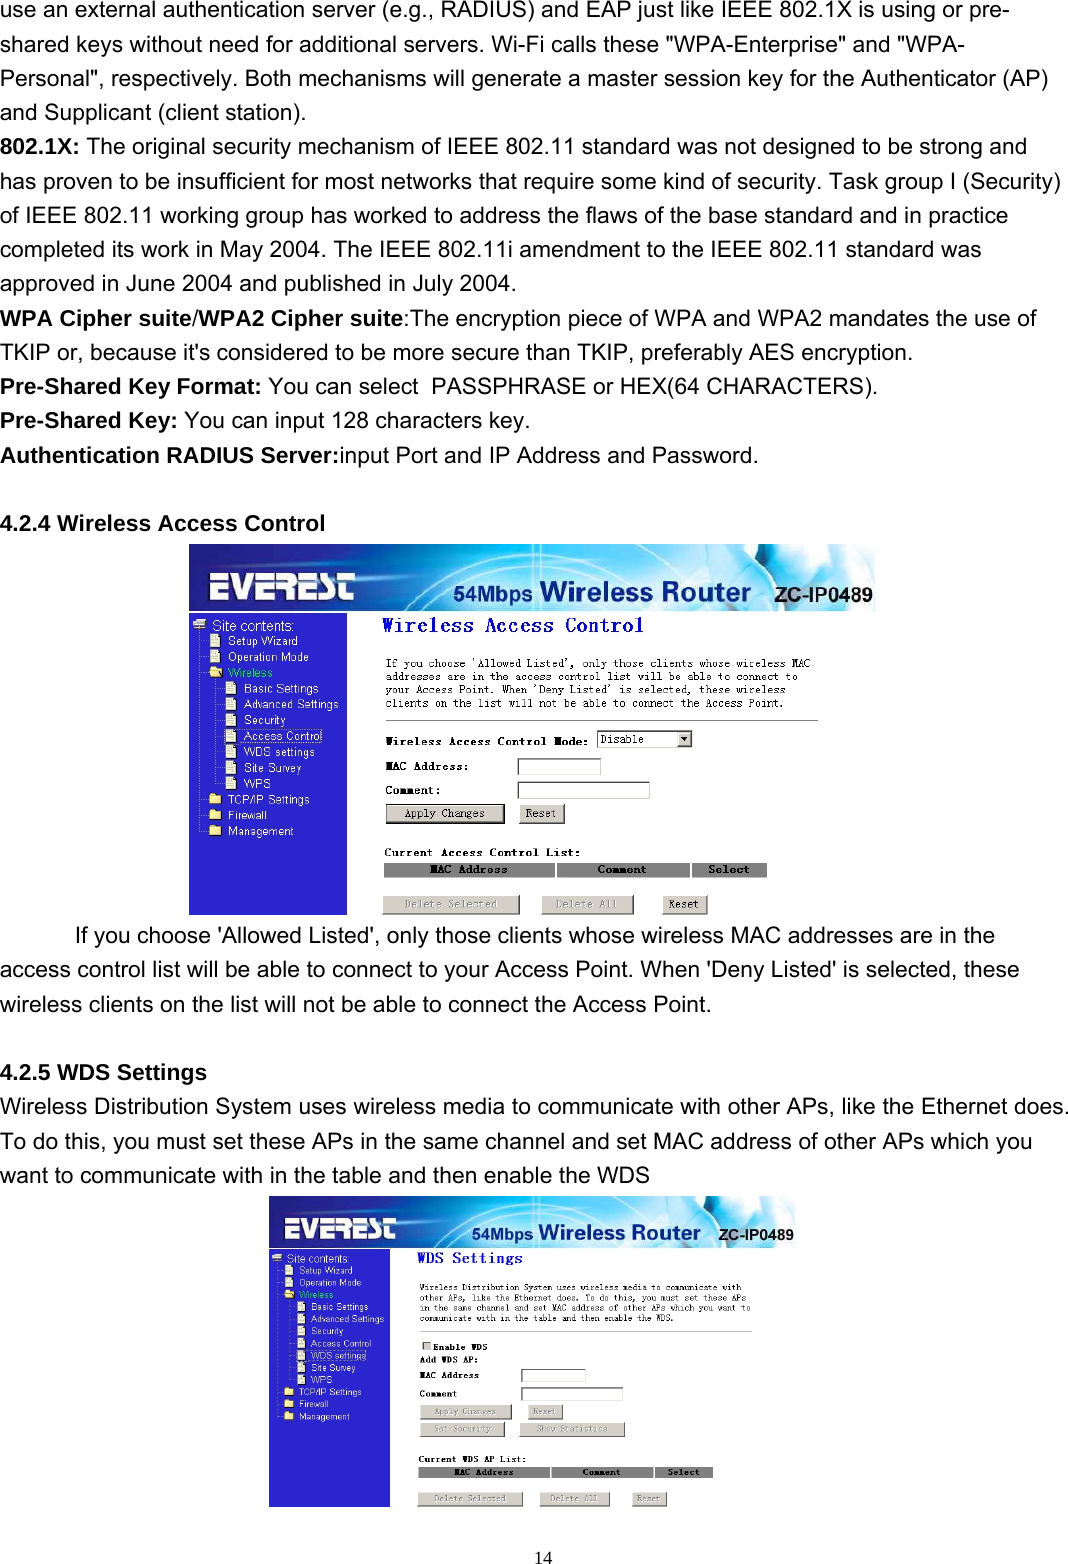  14use an external authentication server (e.g., RADIUS) and EAP just like IEEE 802.1X is using or pre-shared keys without need for additional servers. Wi-Fi calls these &quot;WPA-Enterprise&quot; and &quot;WPA-Personal&quot;, respectively. Both mechanisms will generate a master session key for the Authenticator (AP) and Supplicant (client station). 802.1X: The original security mechanism of IEEE 802.11 standard was not designed to be strong and has proven to be insufficient for most networks that require some kind of security. Task group I (Security) of IEEE 802.11 working group has worked to address the flaws of the base standard and in practice completed its work in May 2004. The IEEE 802.11i amendment to the IEEE 802.11 standard was approved in June 2004 and published in July 2004. WPA Cipher suite/WPA2 Cipher suite:The encryption piece of WPA and WPA2 mandates the use of TKIP or, because it&apos;s considered to be more secure than TKIP, preferably AES encryption.  Pre-Shared Key Format: You can select  PASSPHRASE or HEX(64 CHARACTERS). Pre-Shared Key: You can input 128 characters key. Authentication RADIUS Server:input Port and IP Address and Password.  4.2.4 Wireless Access Control  If you choose &apos;Allowed Listed&apos;, only those clients whose wireless MAC addresses are in the access control list will be able to connect to your Access Point. When &apos;Deny Listed&apos; is selected, these wireless clients on the list will not be able to connect the Access Point.  4.2.5 WDS Settings Wireless Distribution System uses wireless media to communicate with other APs, like the Ethernet does. To do this, you must set these APs in the same channel and set MAC address of other APs which you want to communicate with in the table and then enable the WDS  